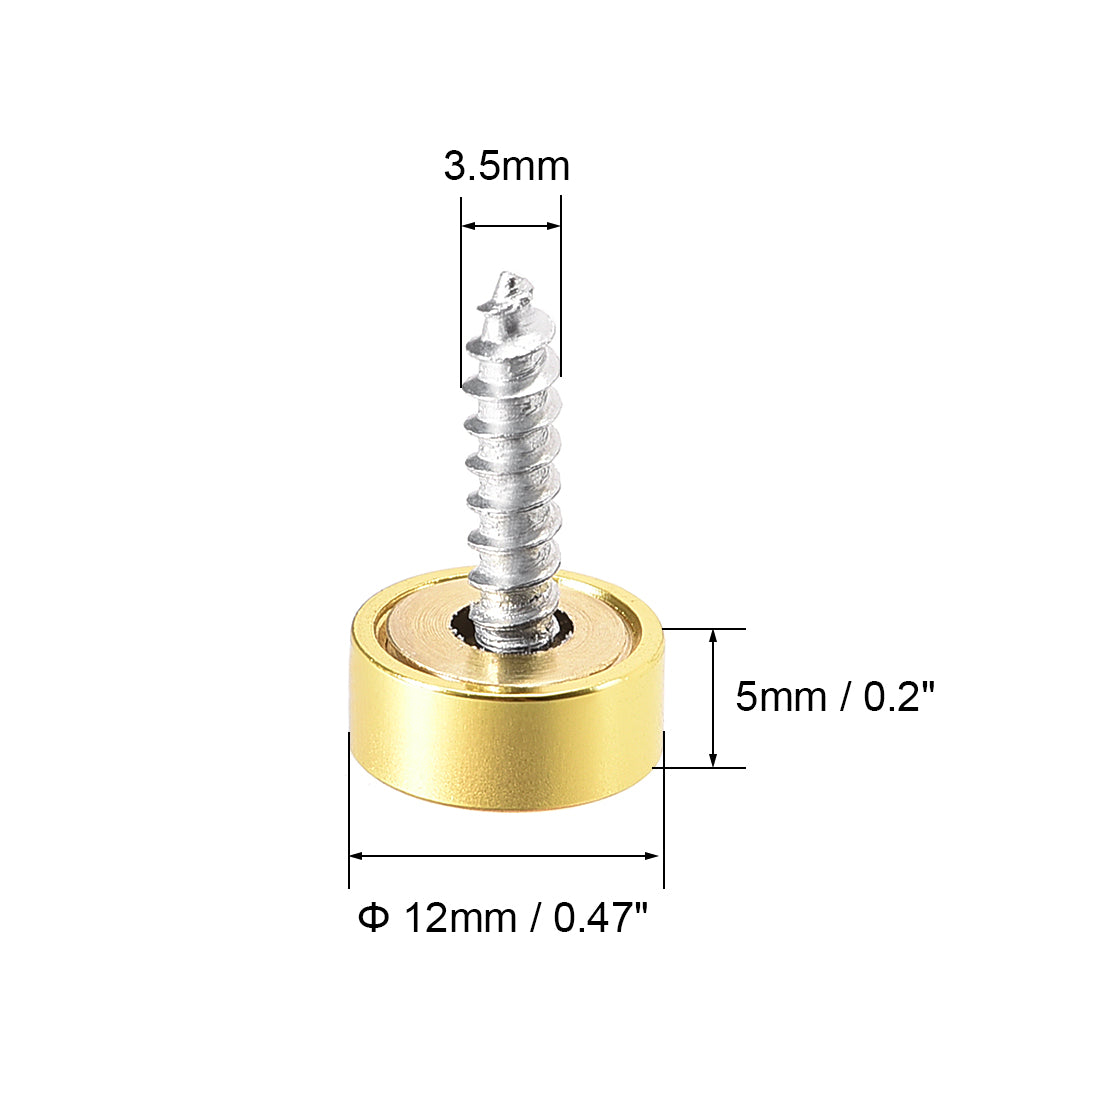 uxcell Uxcell Mirror Screws, Decorative Cap Fasteners Cover Nails, Electroplated, Bright Golden 12mm/0.47" Brass 8pcs